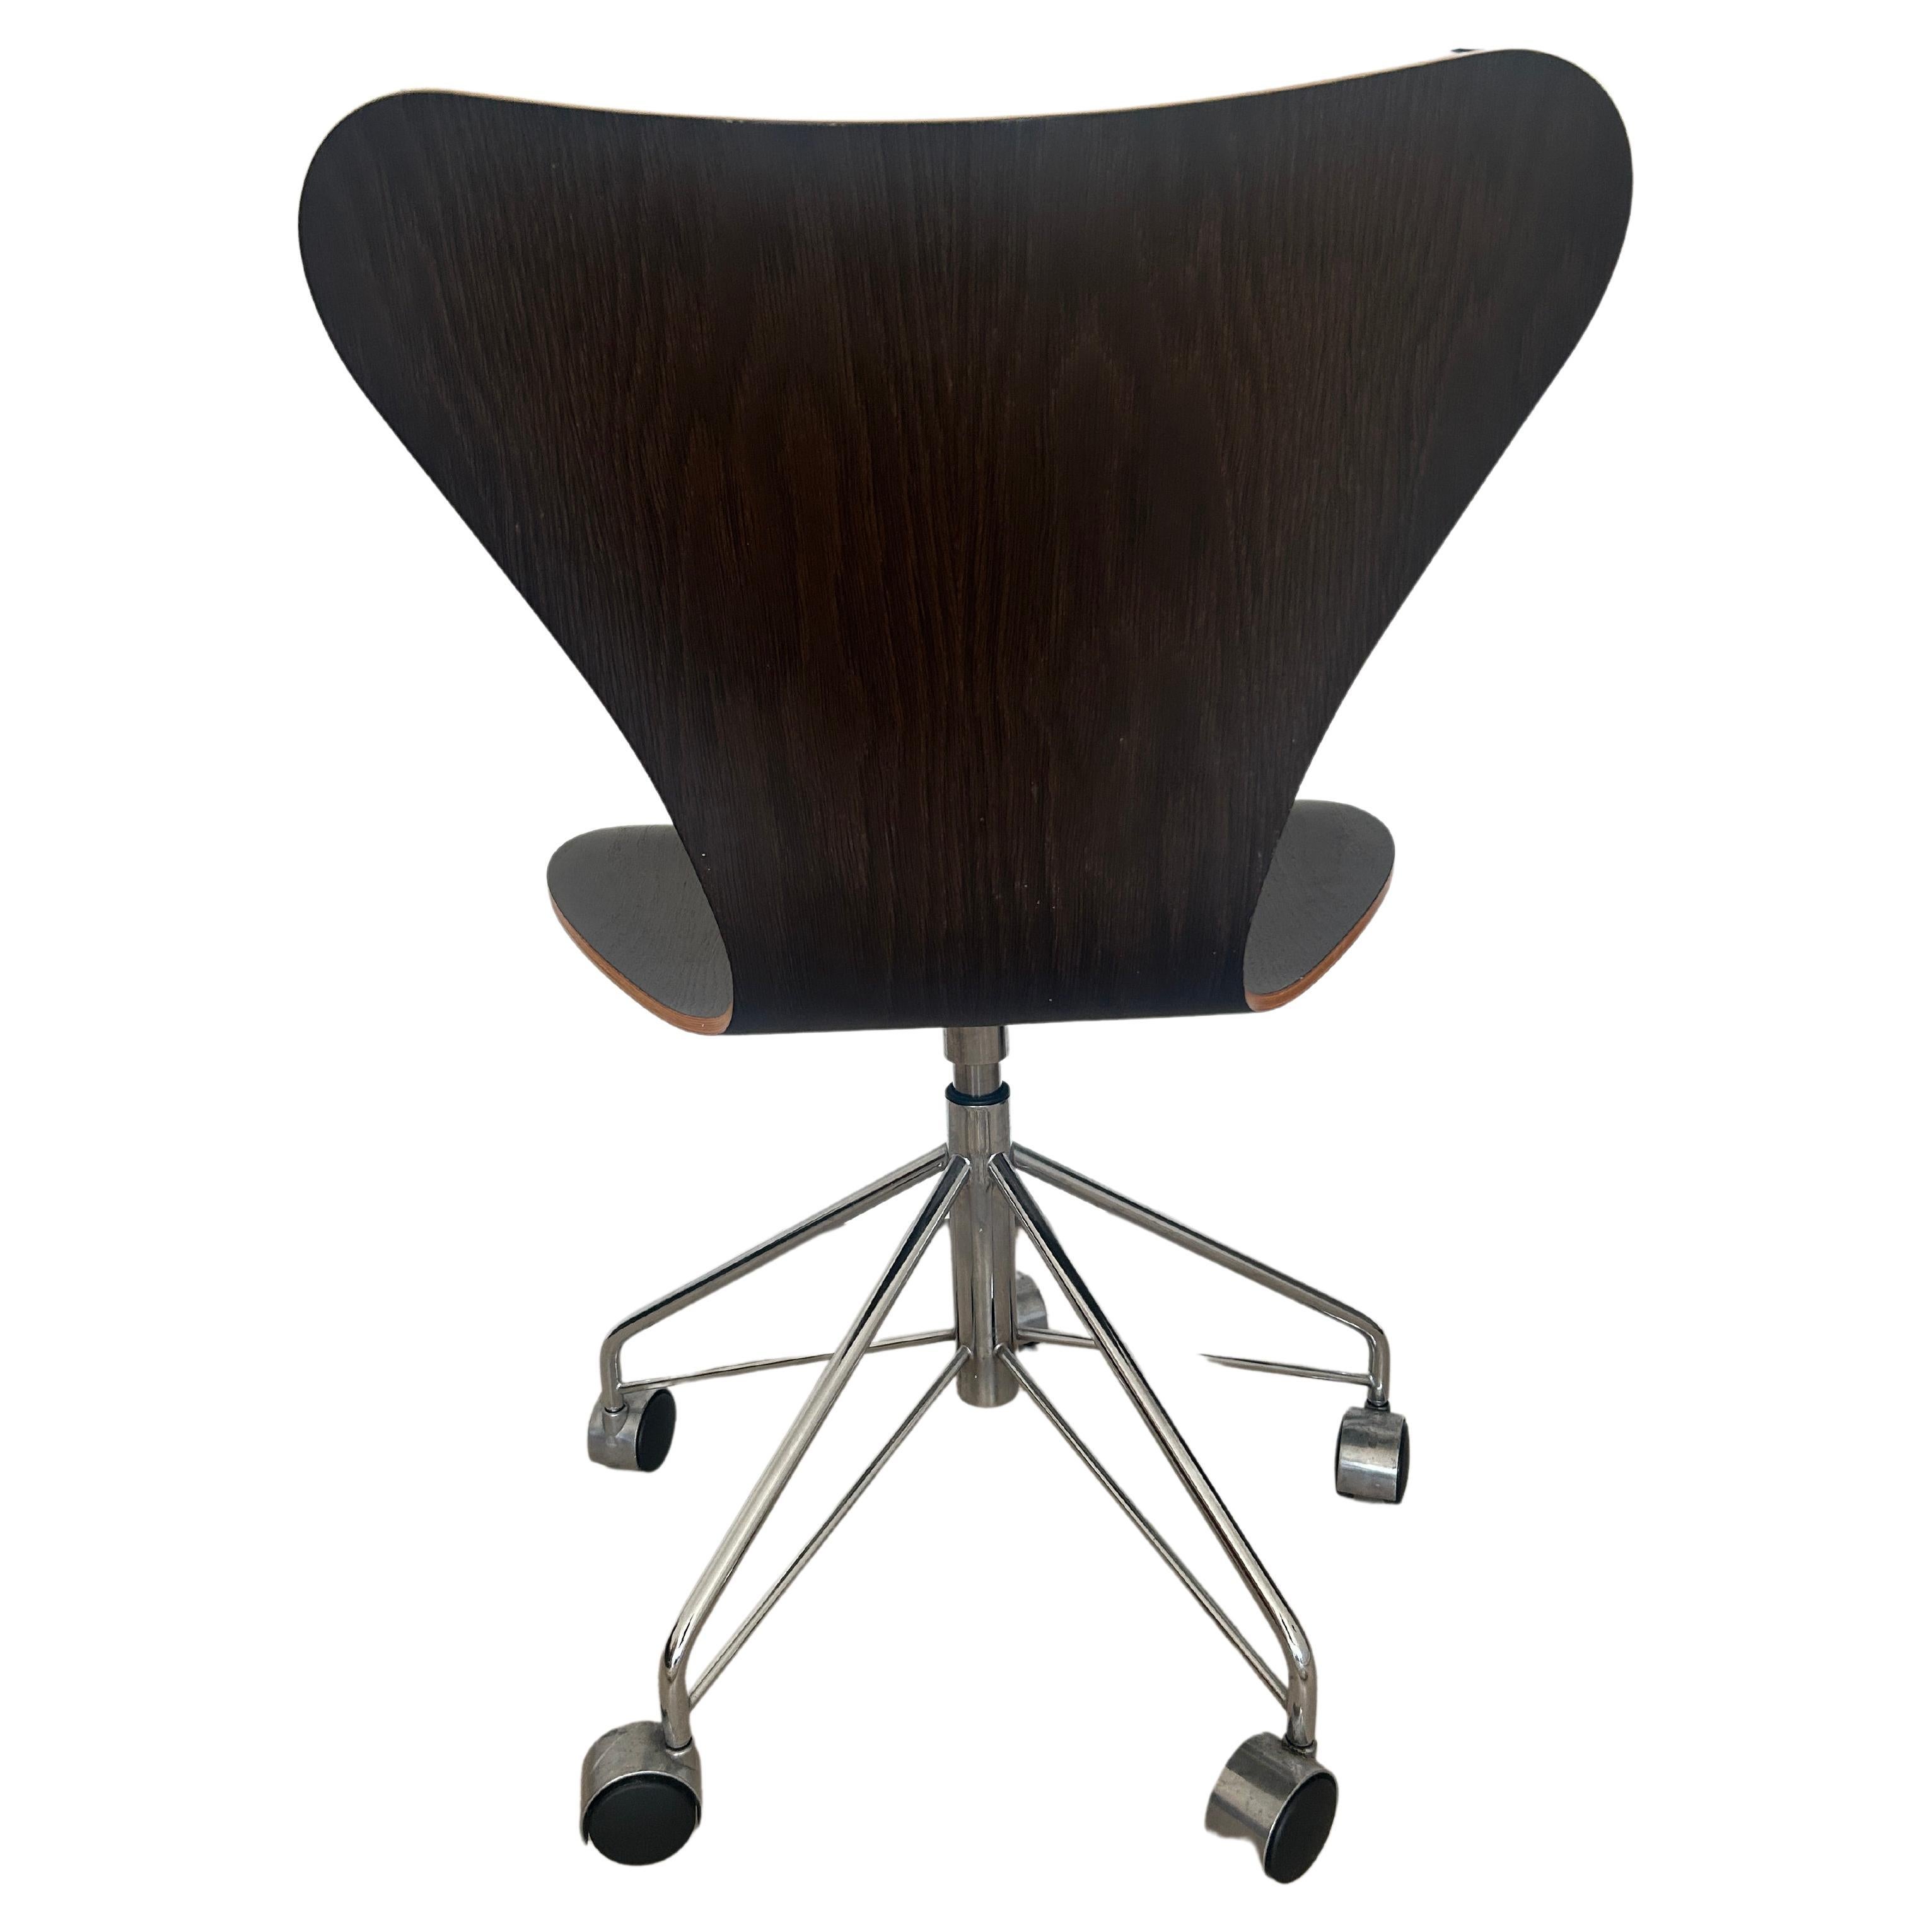 (1) Danish Modern Design the series 7 chair on an original rolling 5 star base with Casters. Designed by Arne Jacobsen for Fritz Hansen. Dark Brown Oak finish on Bentwood molded seat. Located In Brooklyn NYC. Ready for Use. Labeled.

Height